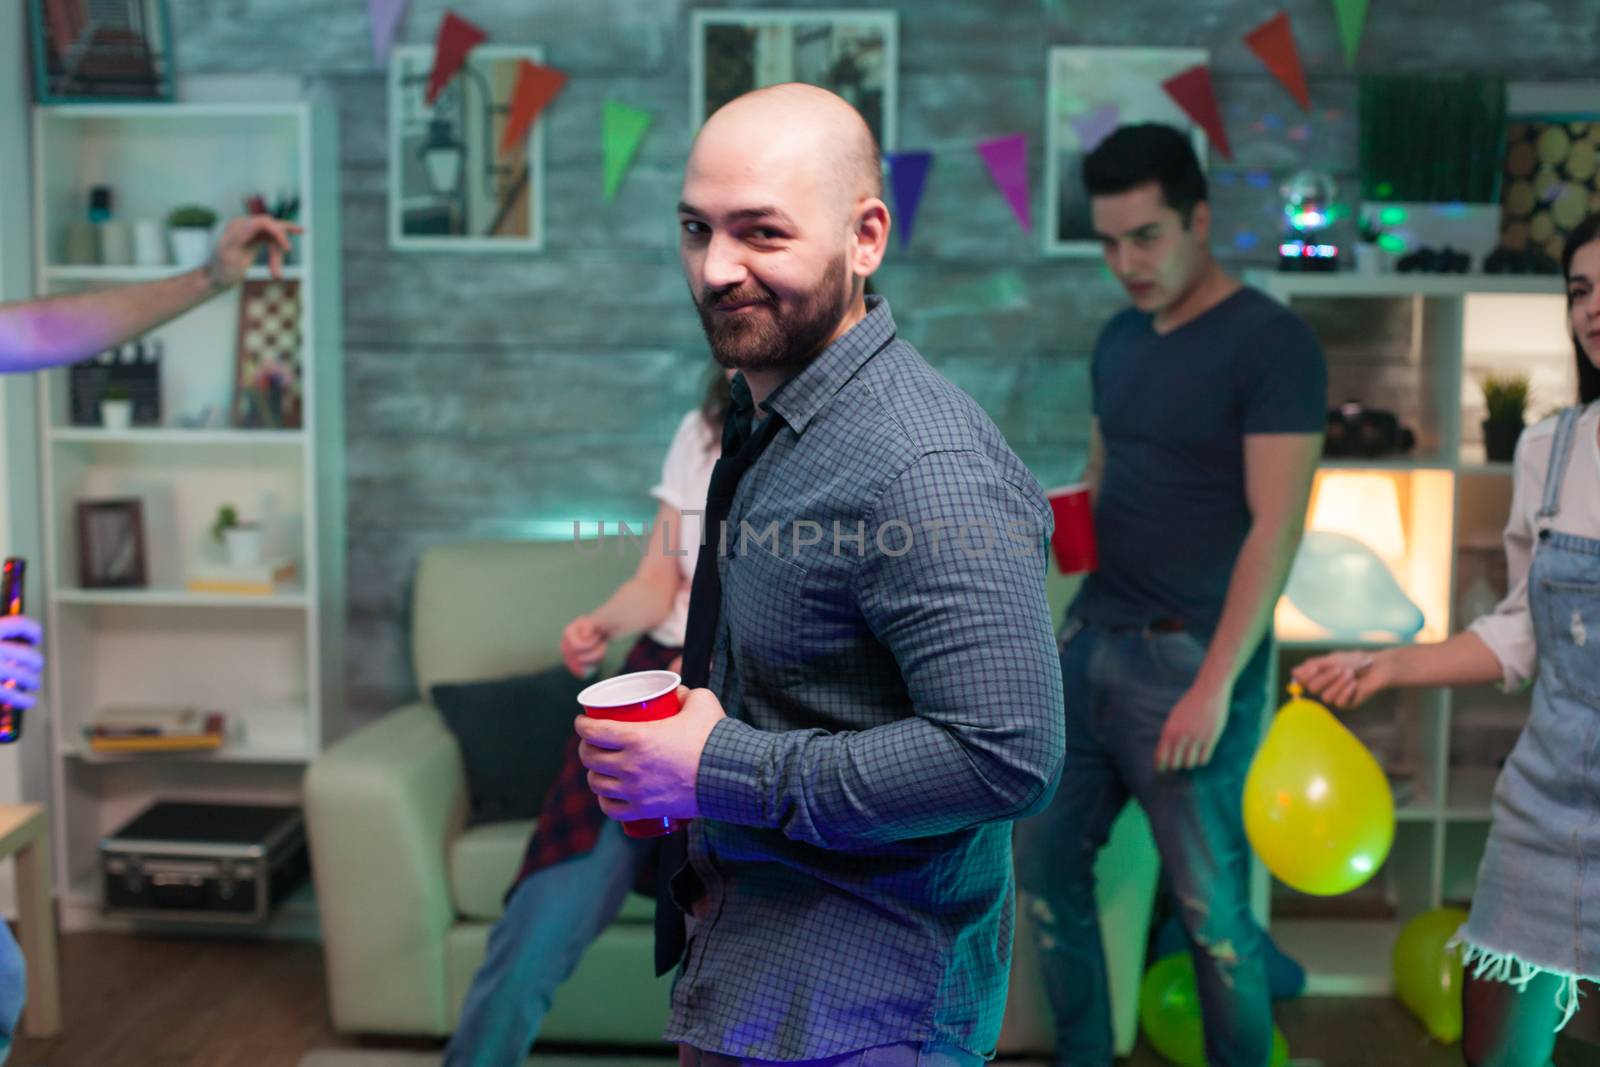 Bald man looking at the camera at a party his friends while partying. Man standing with a beer cup.